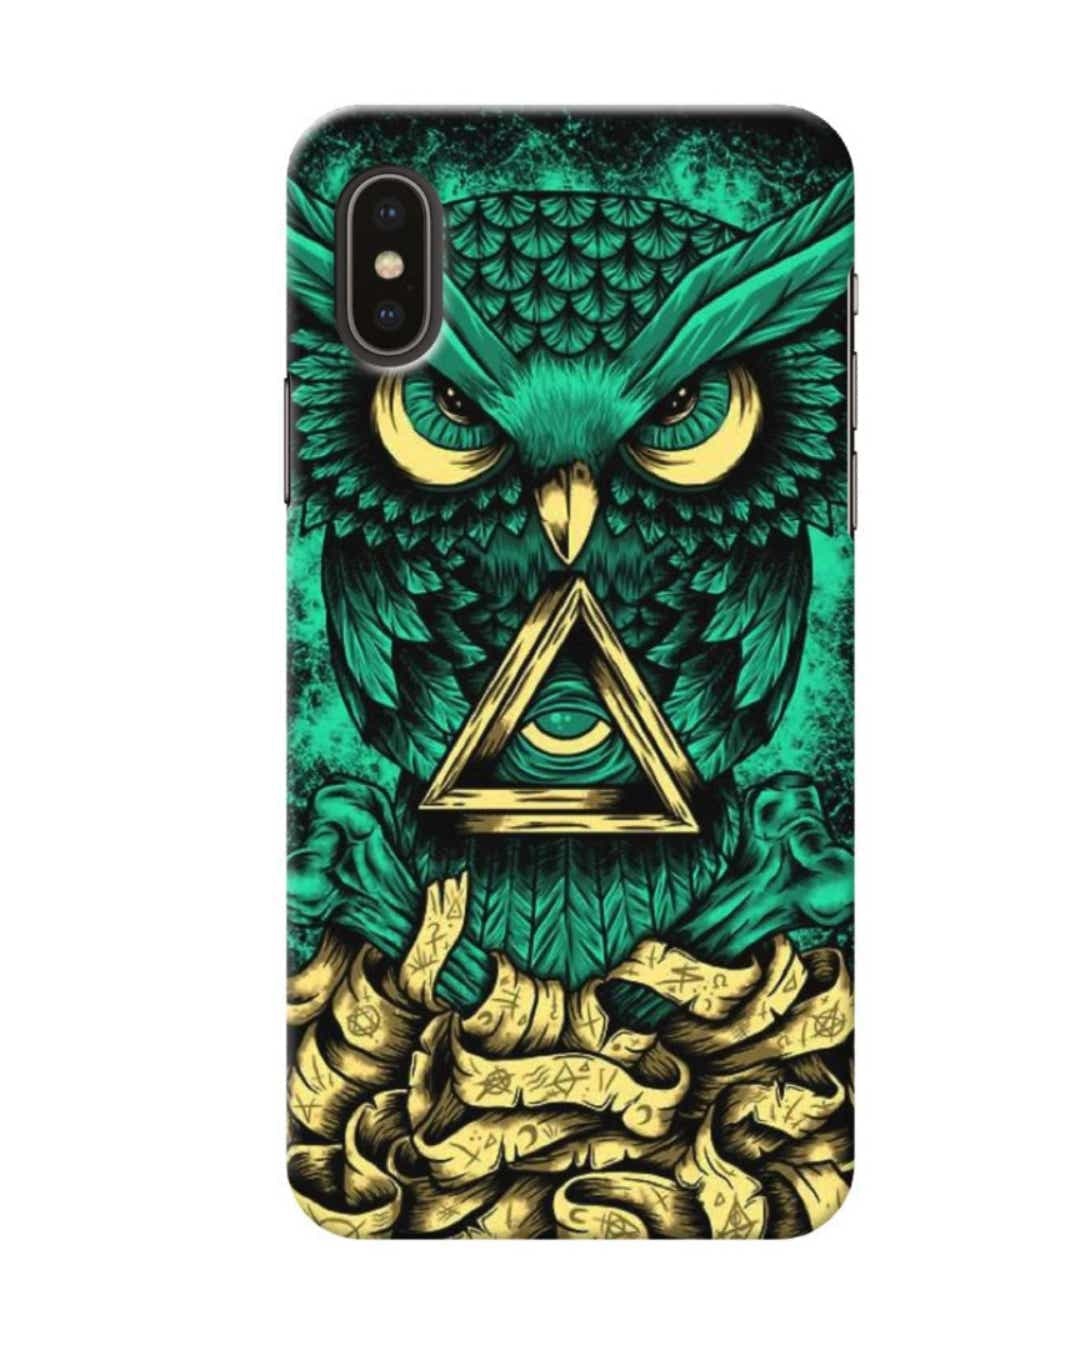 Shop Green Owl Printed Designer Hard Cover For iPhone X (Impact Resistant, Matte Finish)-Front